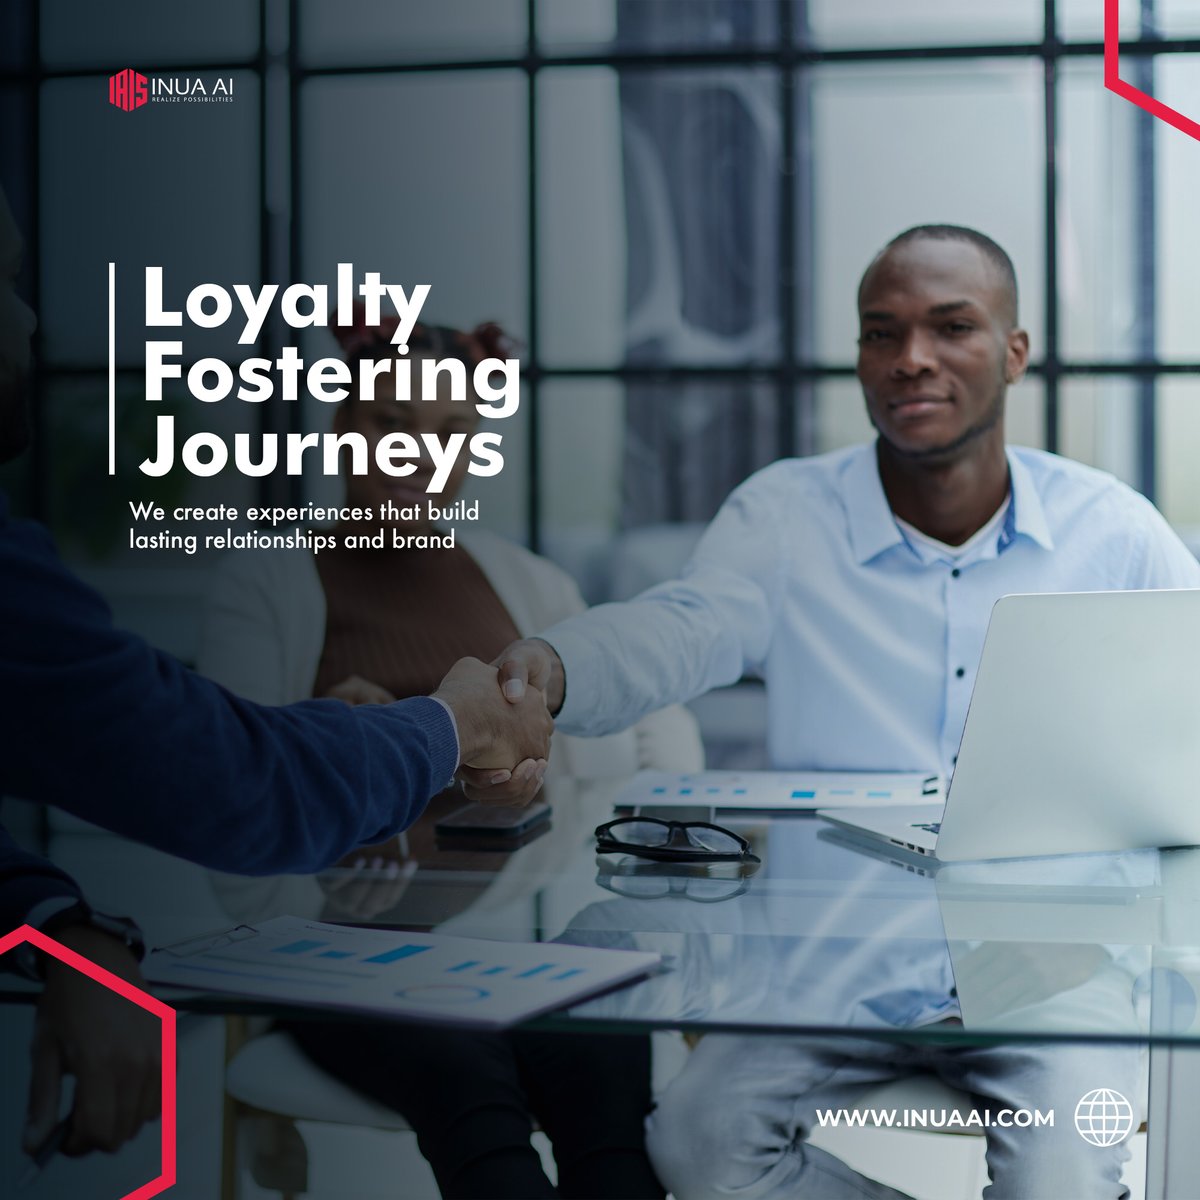 Crafting the ideal customer journey? 🧭 Our Customer Engagement Service specializes in creating seamless, memorable experiences that anticipate customer needs and deliver genuine value, building lasting loyalty. 💯

#CustomerJourney #CustomerExperience #CustomerEngagement